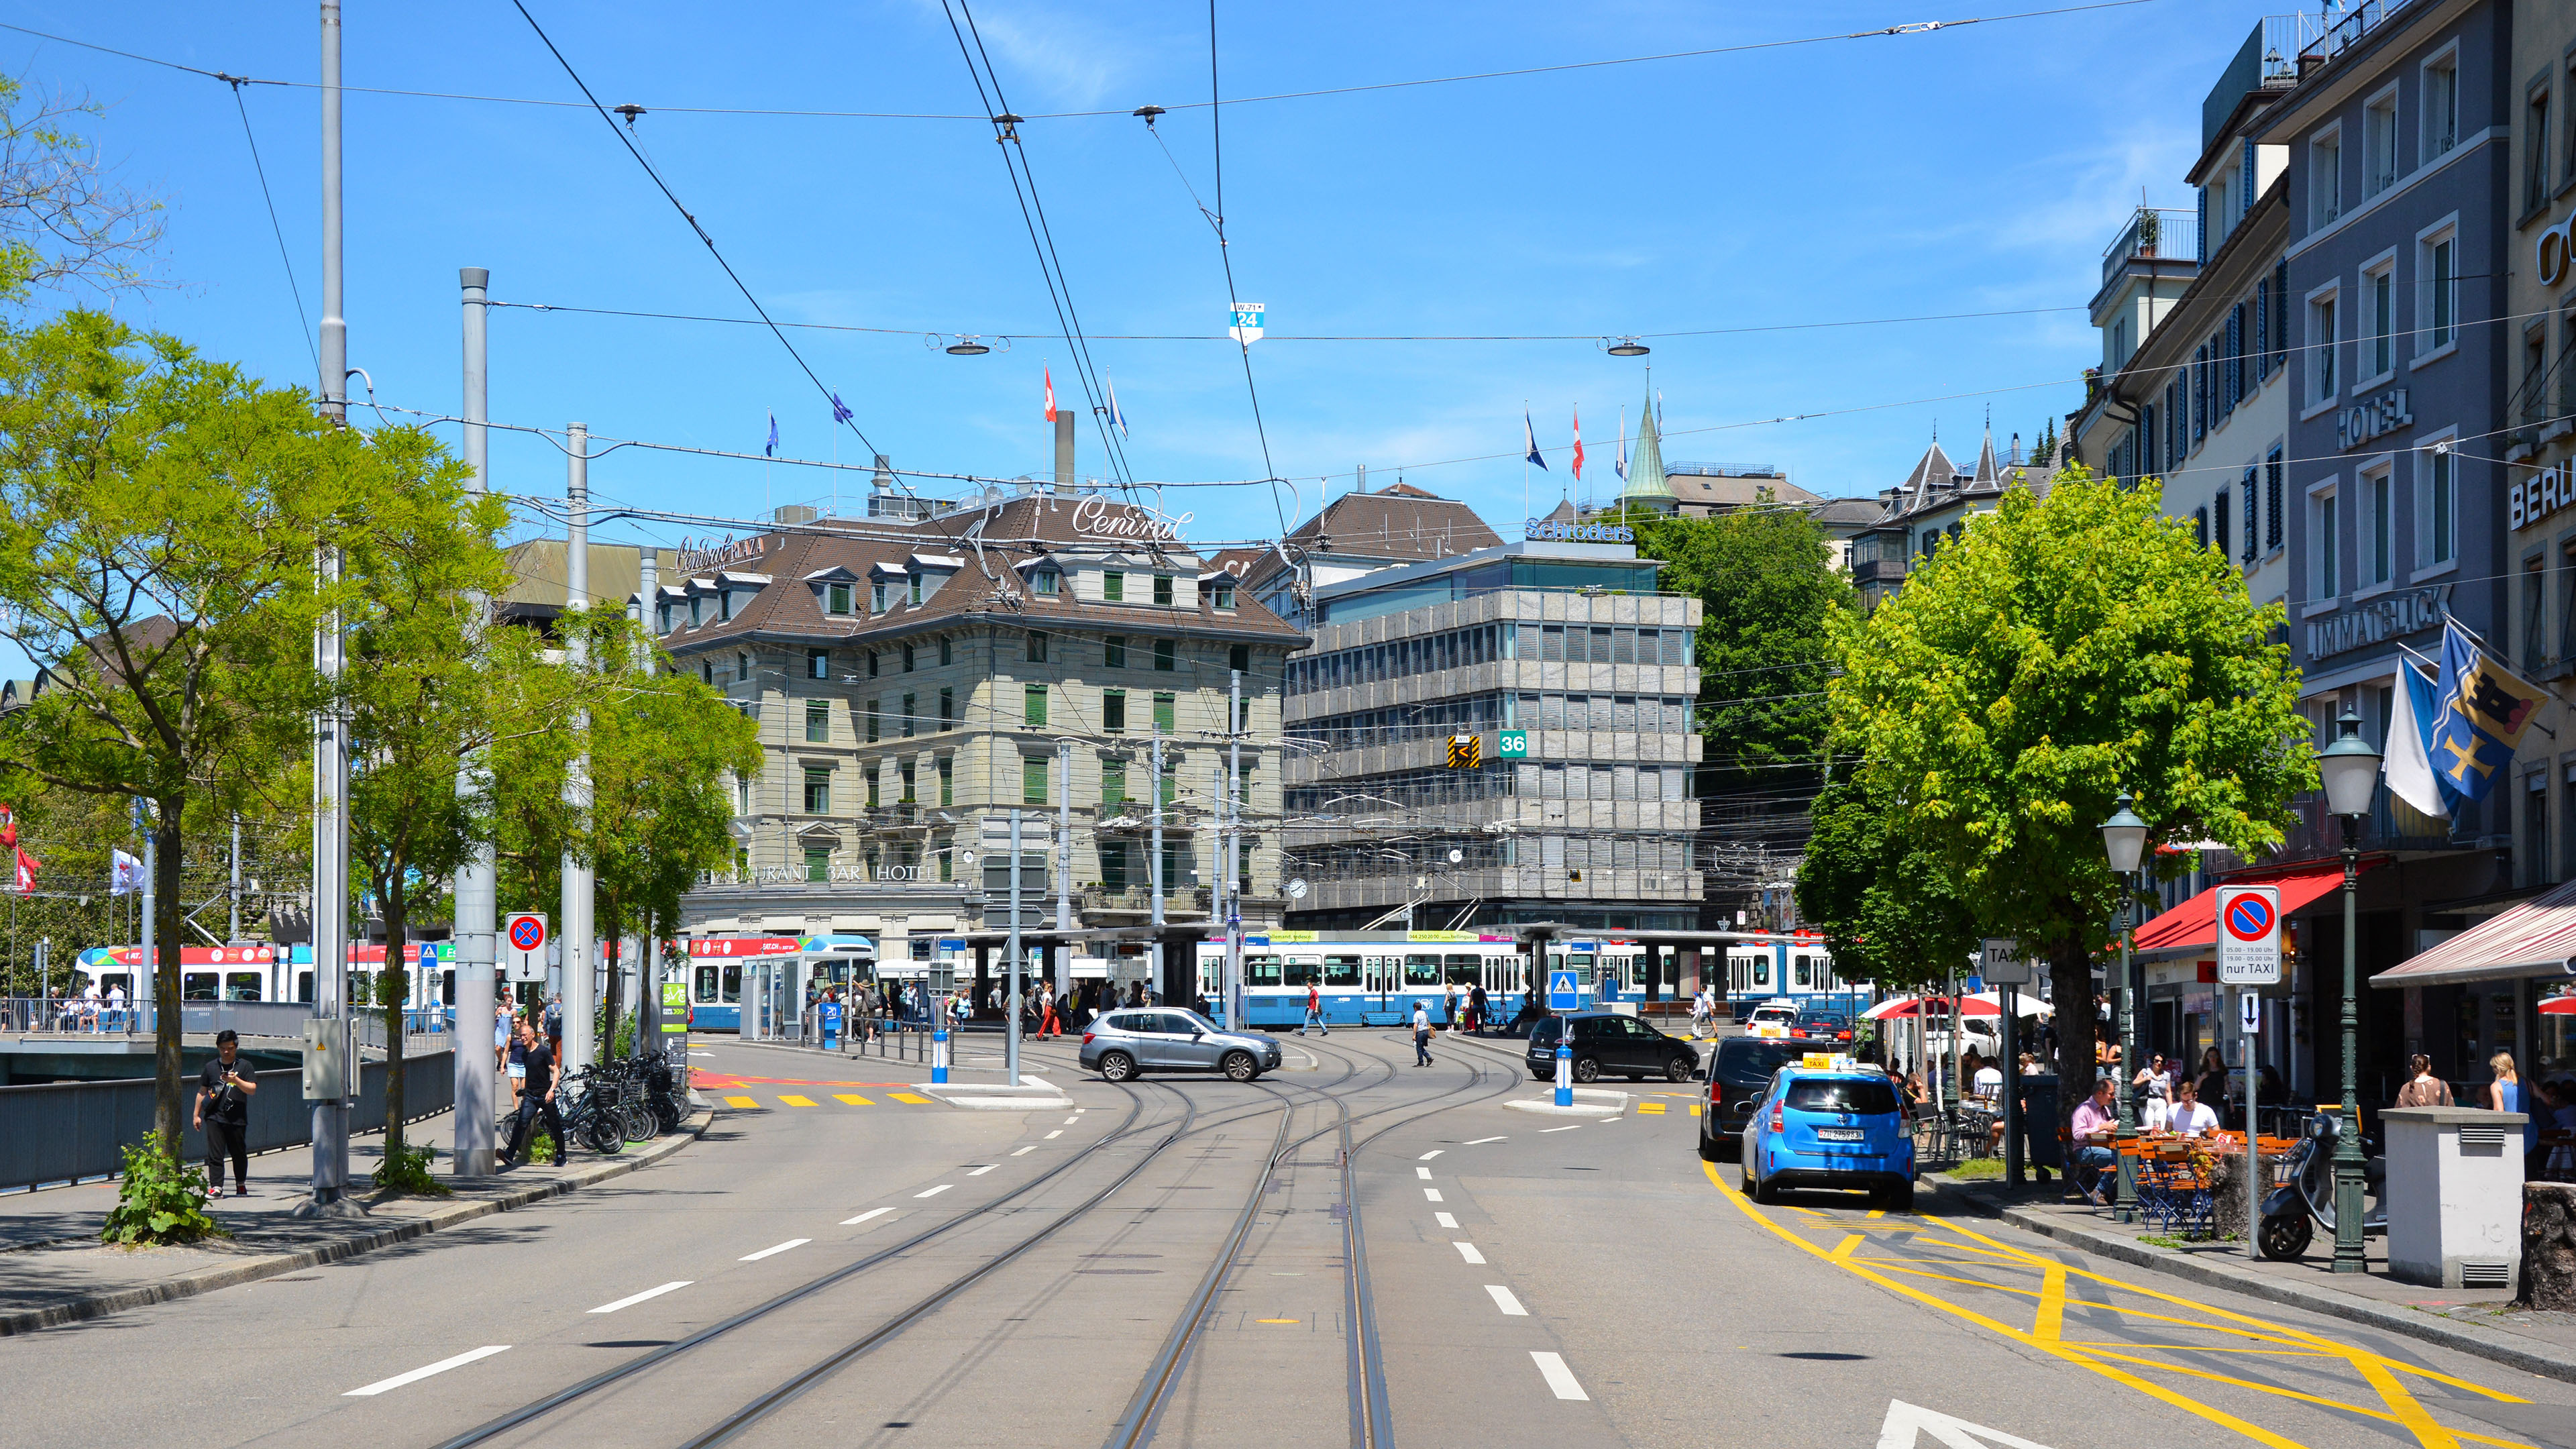 Central Square of Zurich